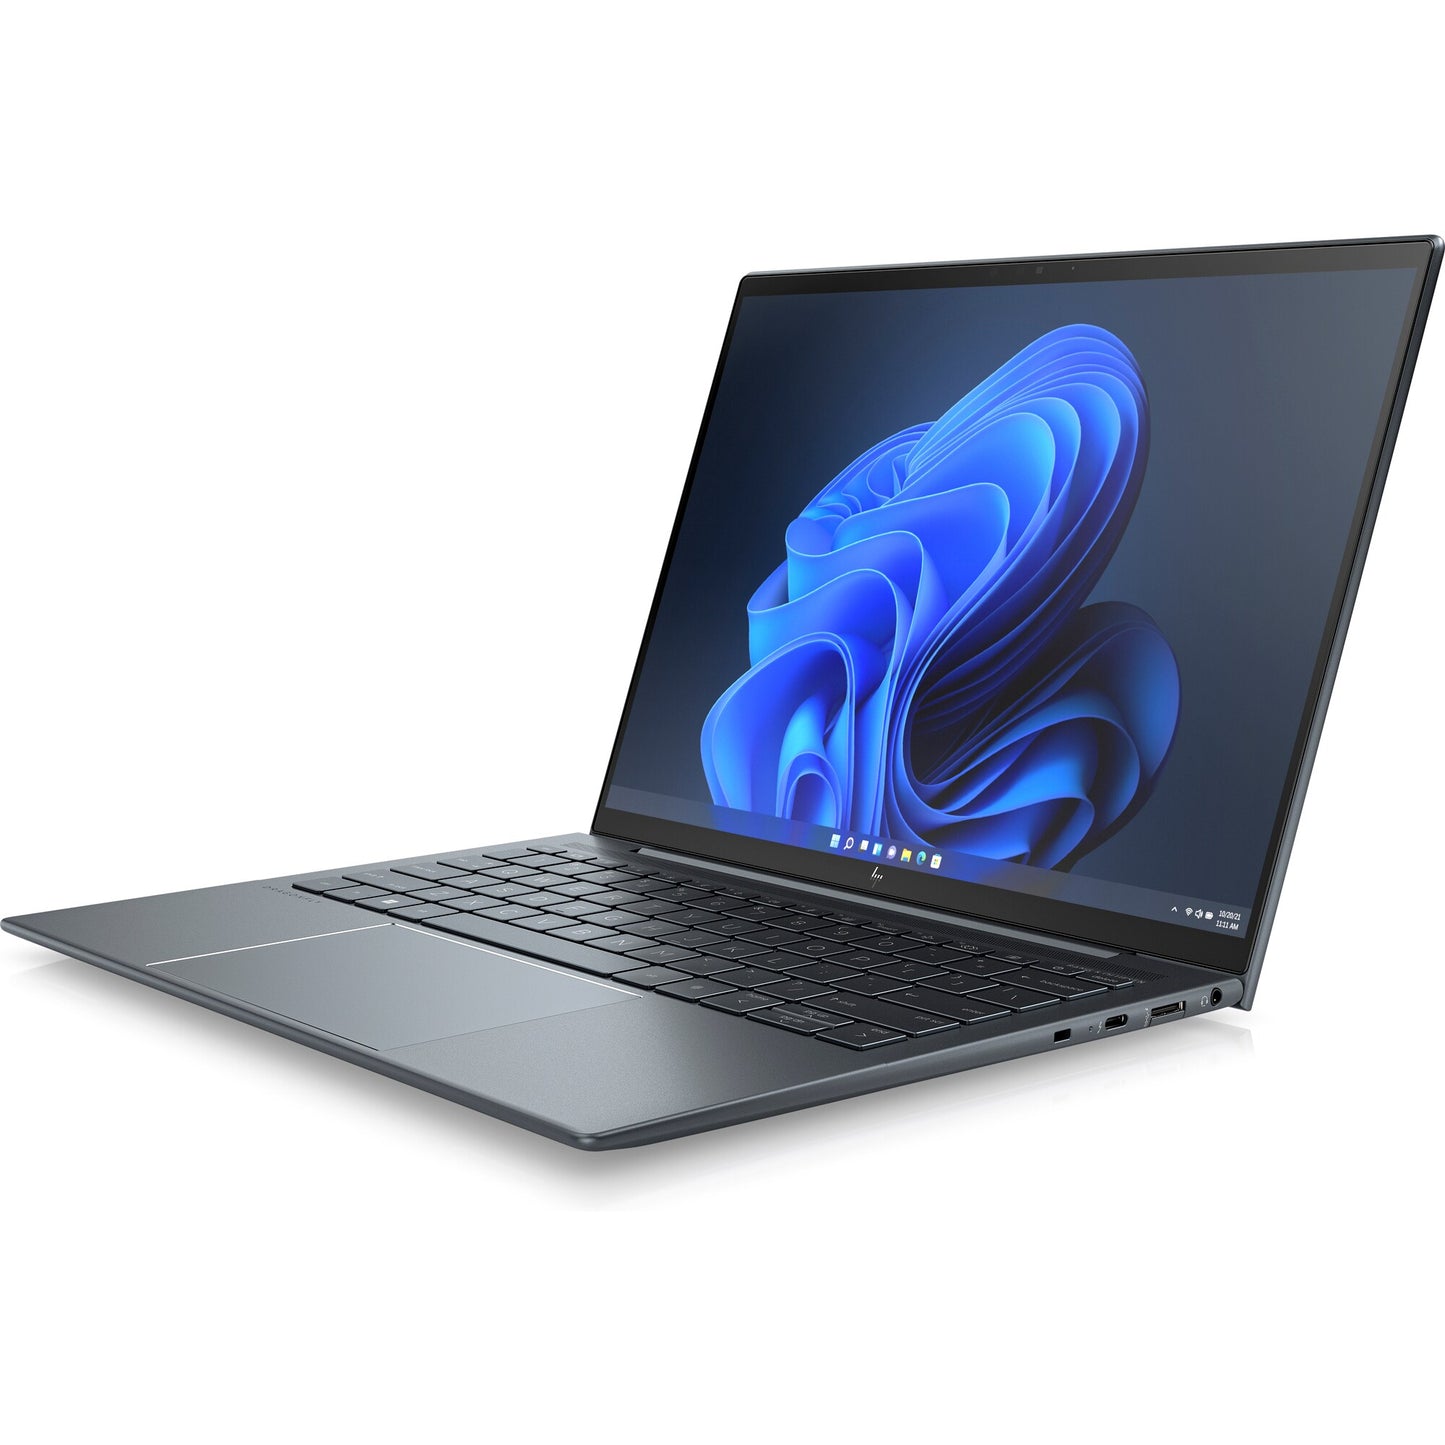 HP Elite Dragonfly 13.5 inch G3 Notebook PC